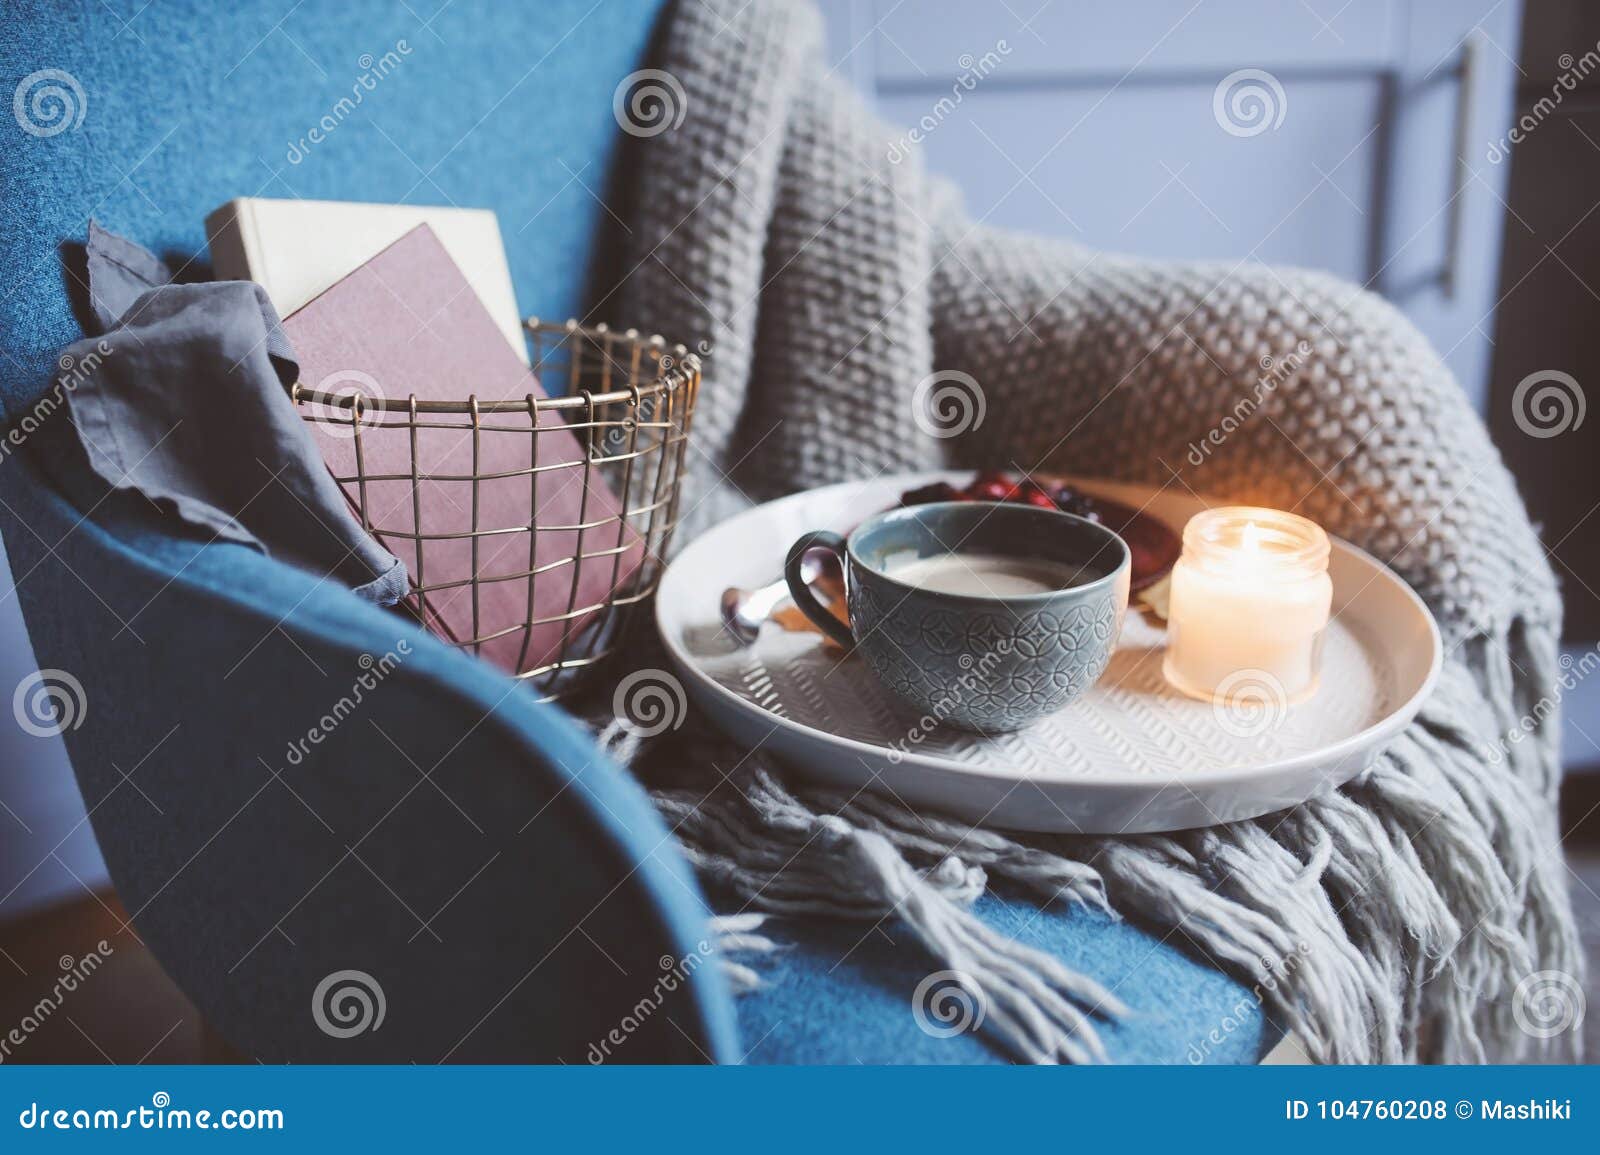 cozy winter weekend at home. morning with coffee or cocoa, books, warm knitted blanket and nordic style chair. hygge concept.